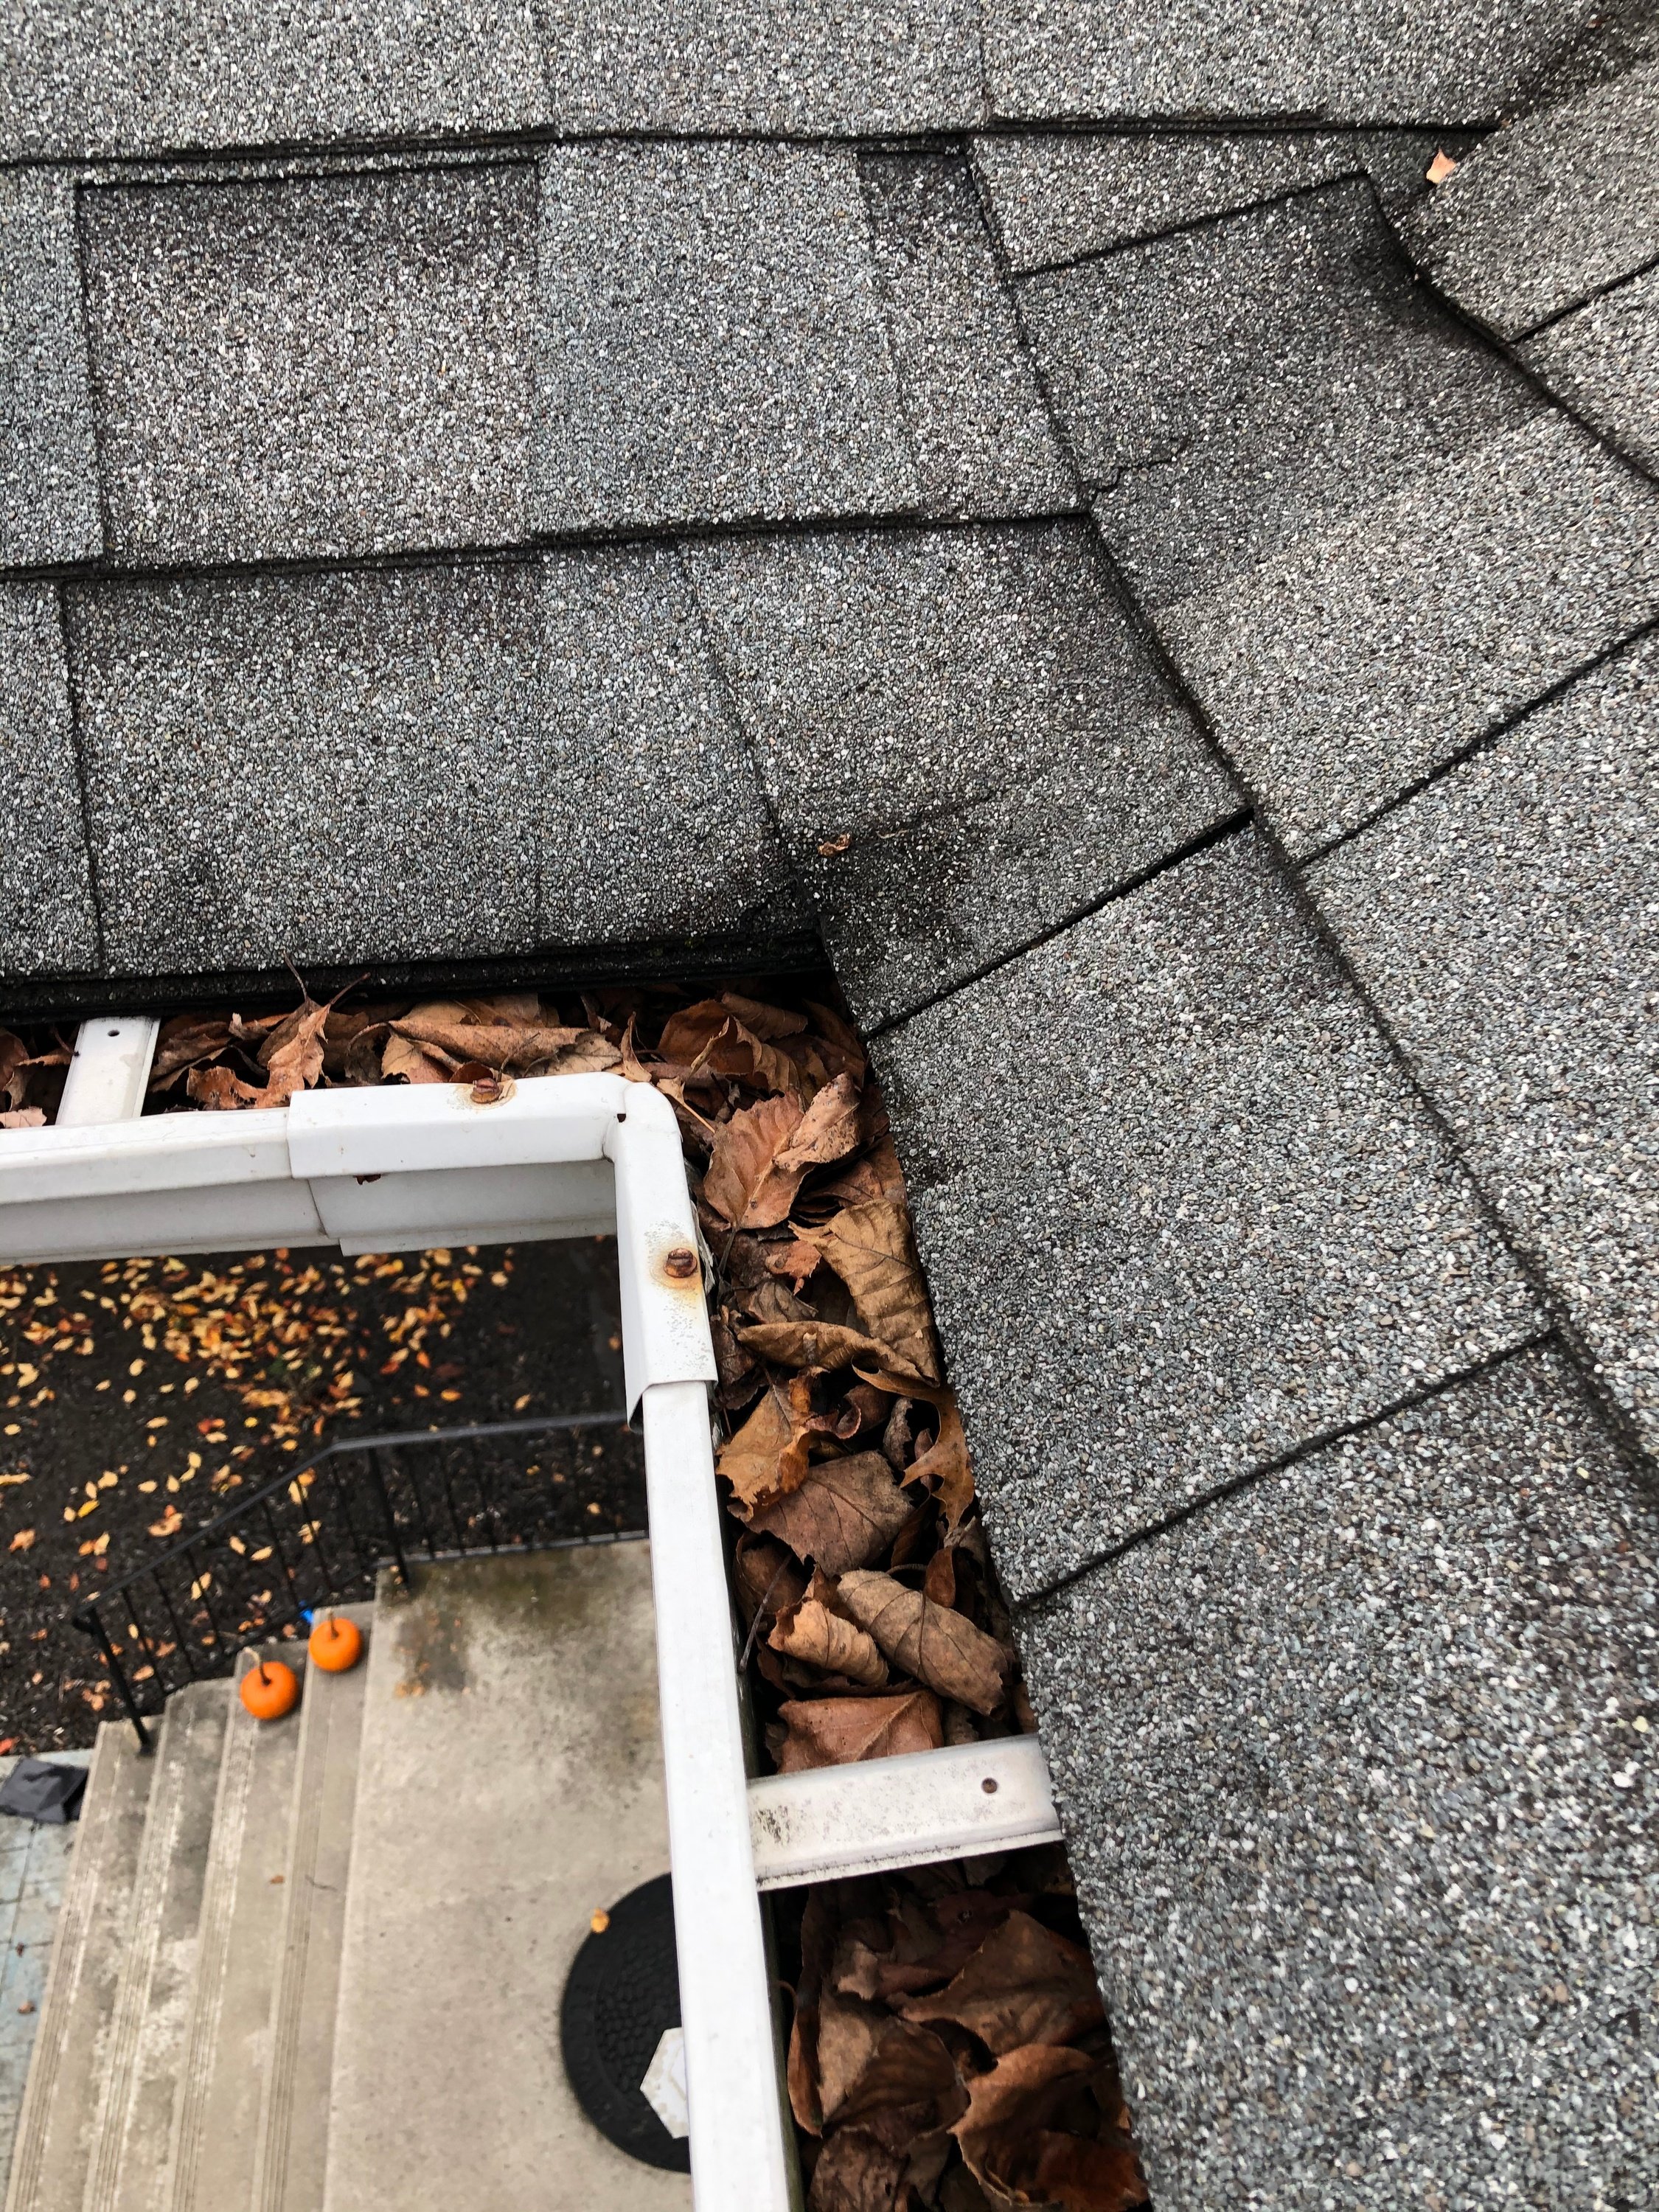 Clean Pro Gutter Cleaning Rochester NY cover